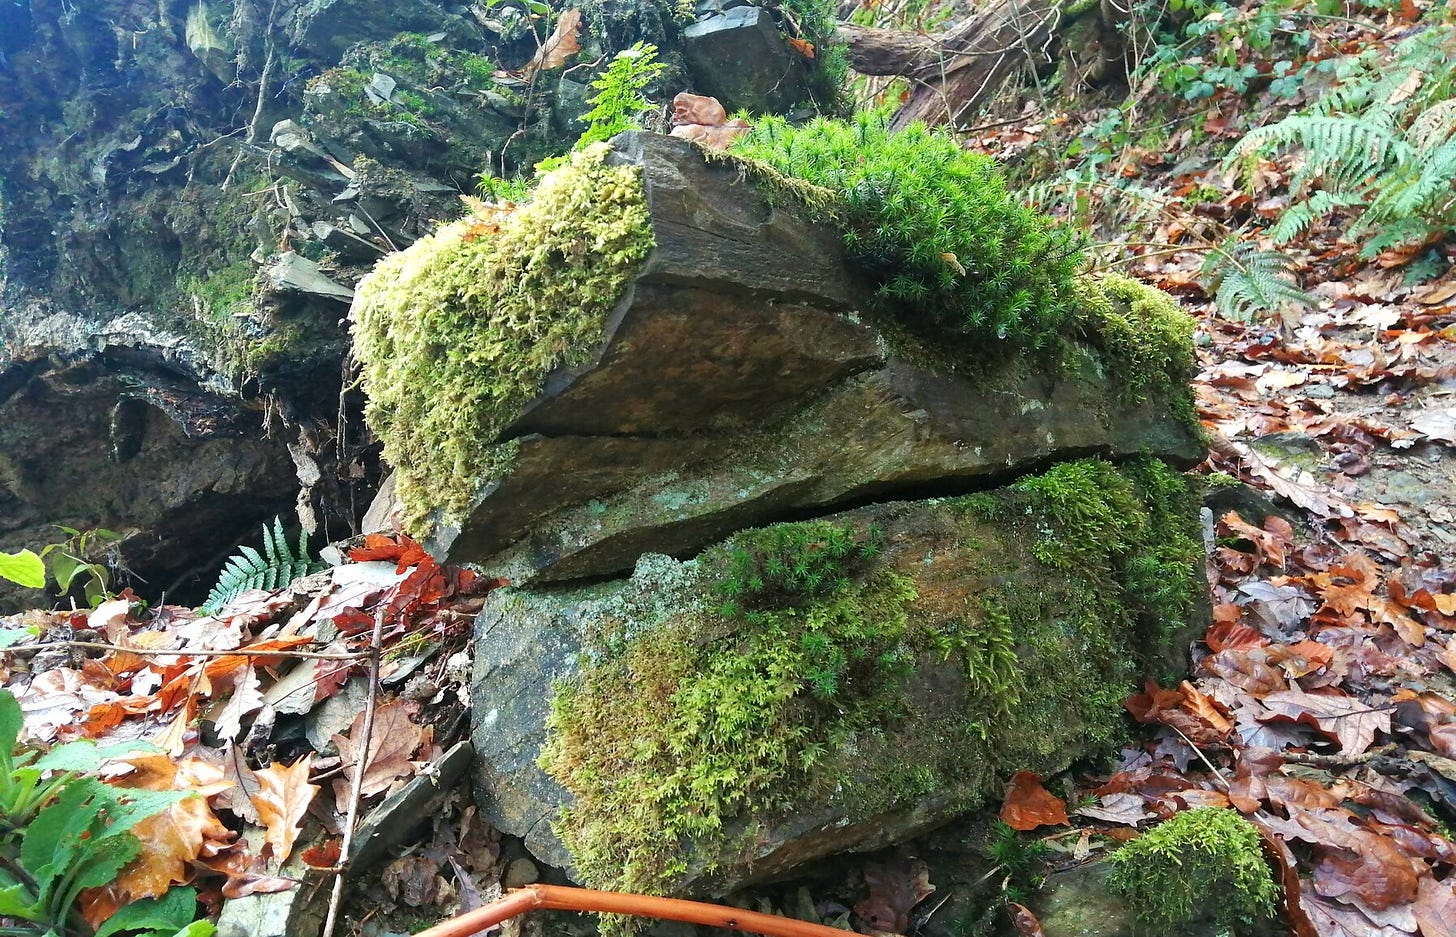 Moss on a stone